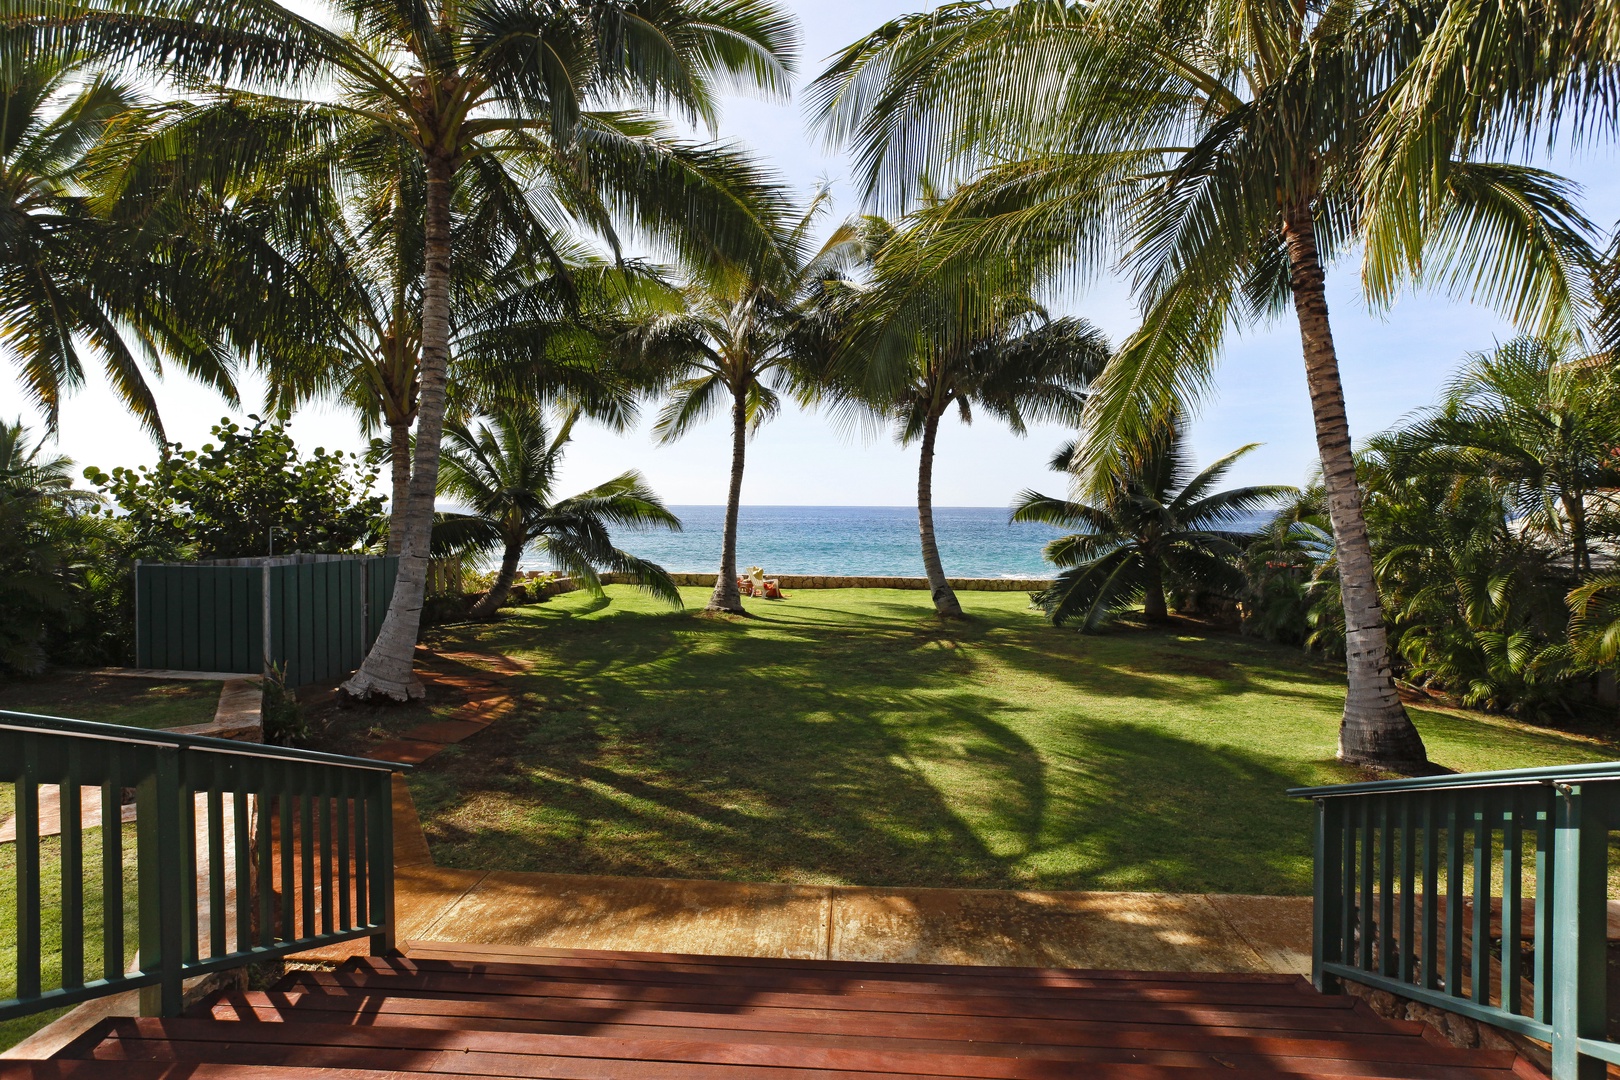 Waianae Vacation Rentals, Makaha Hale - Just steps away from the ocean.